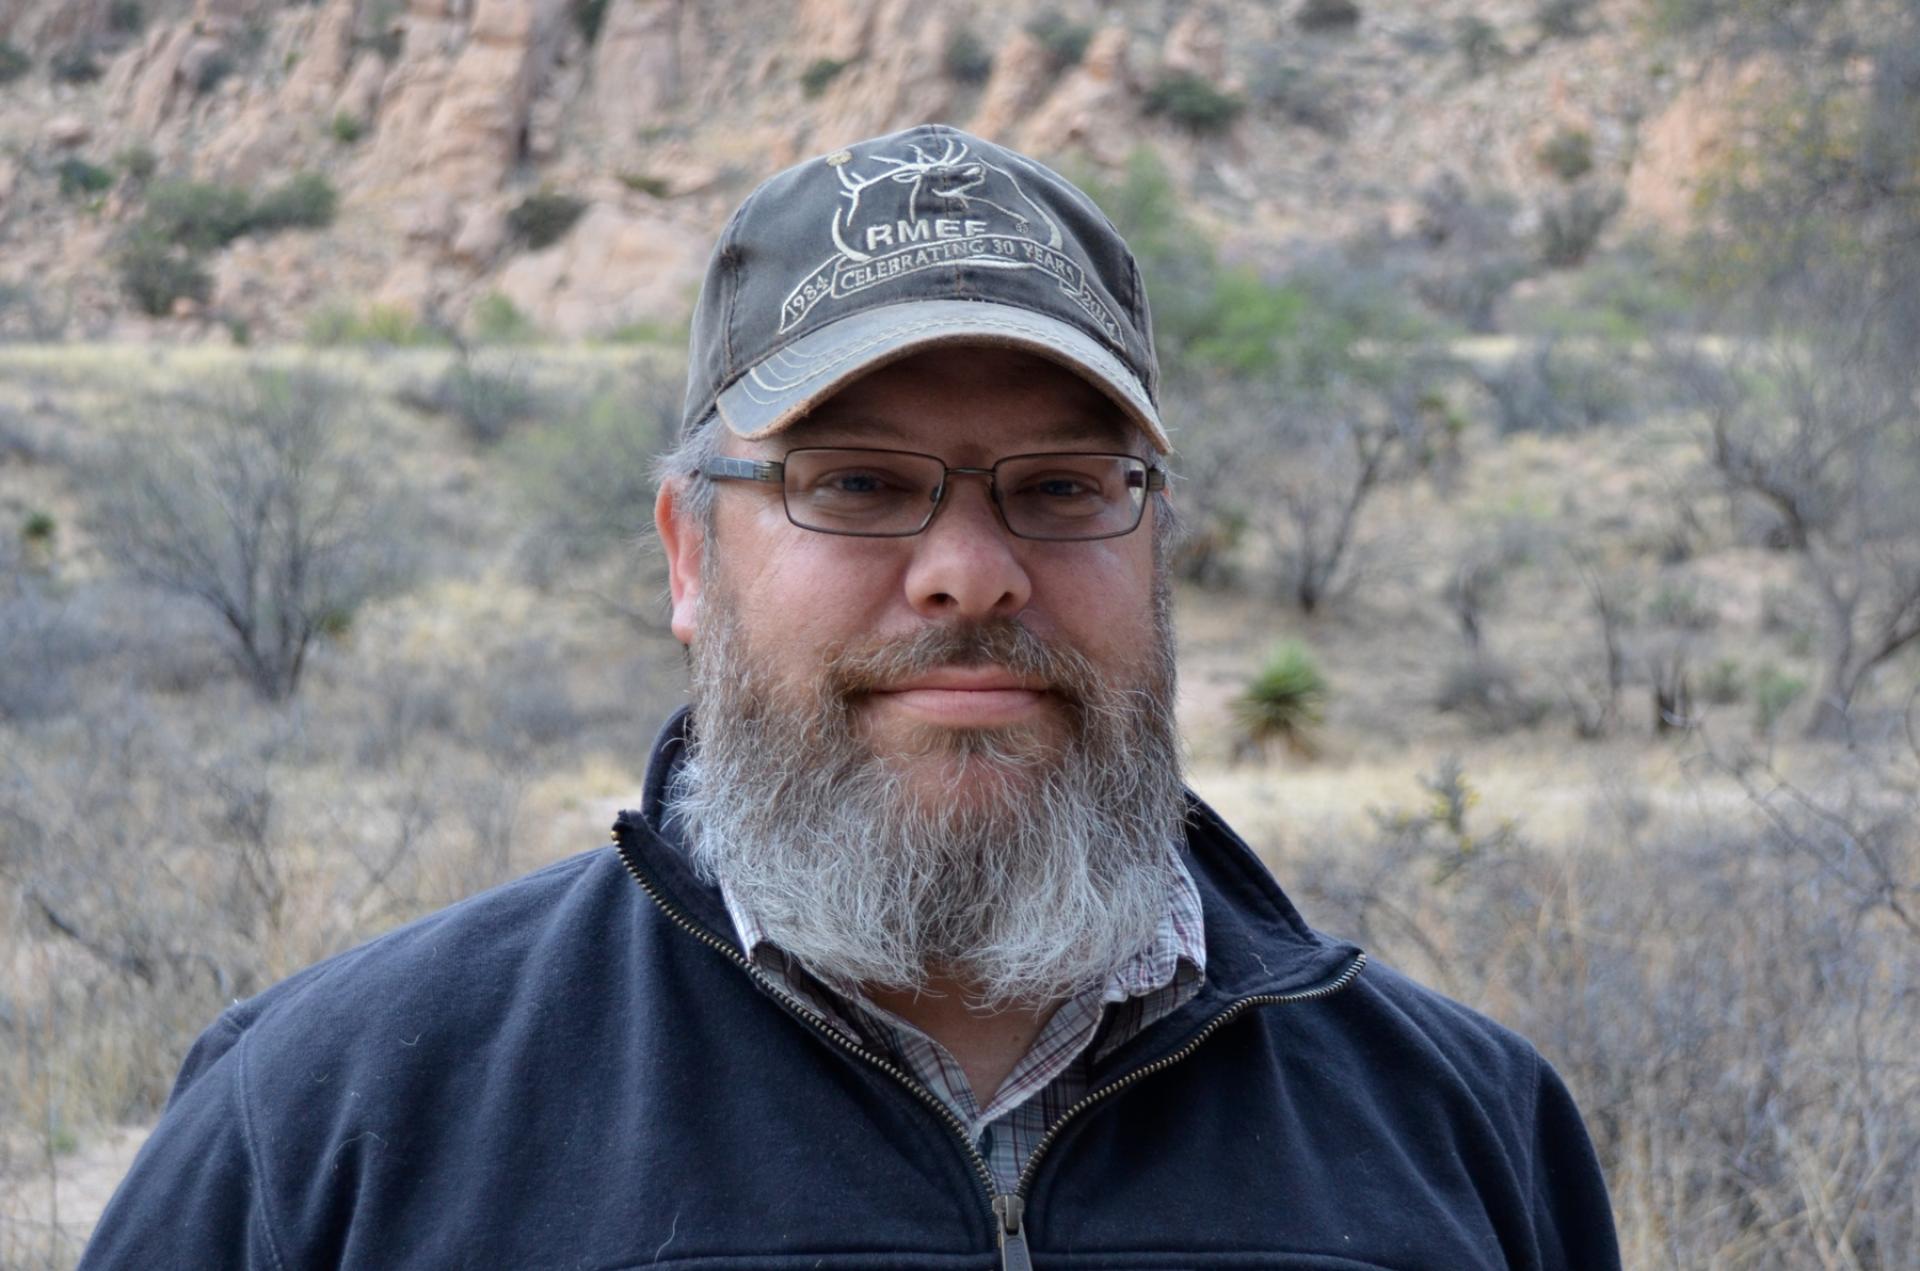 Man with gray beard, glasses and baseball cap standing in front of desert landscape